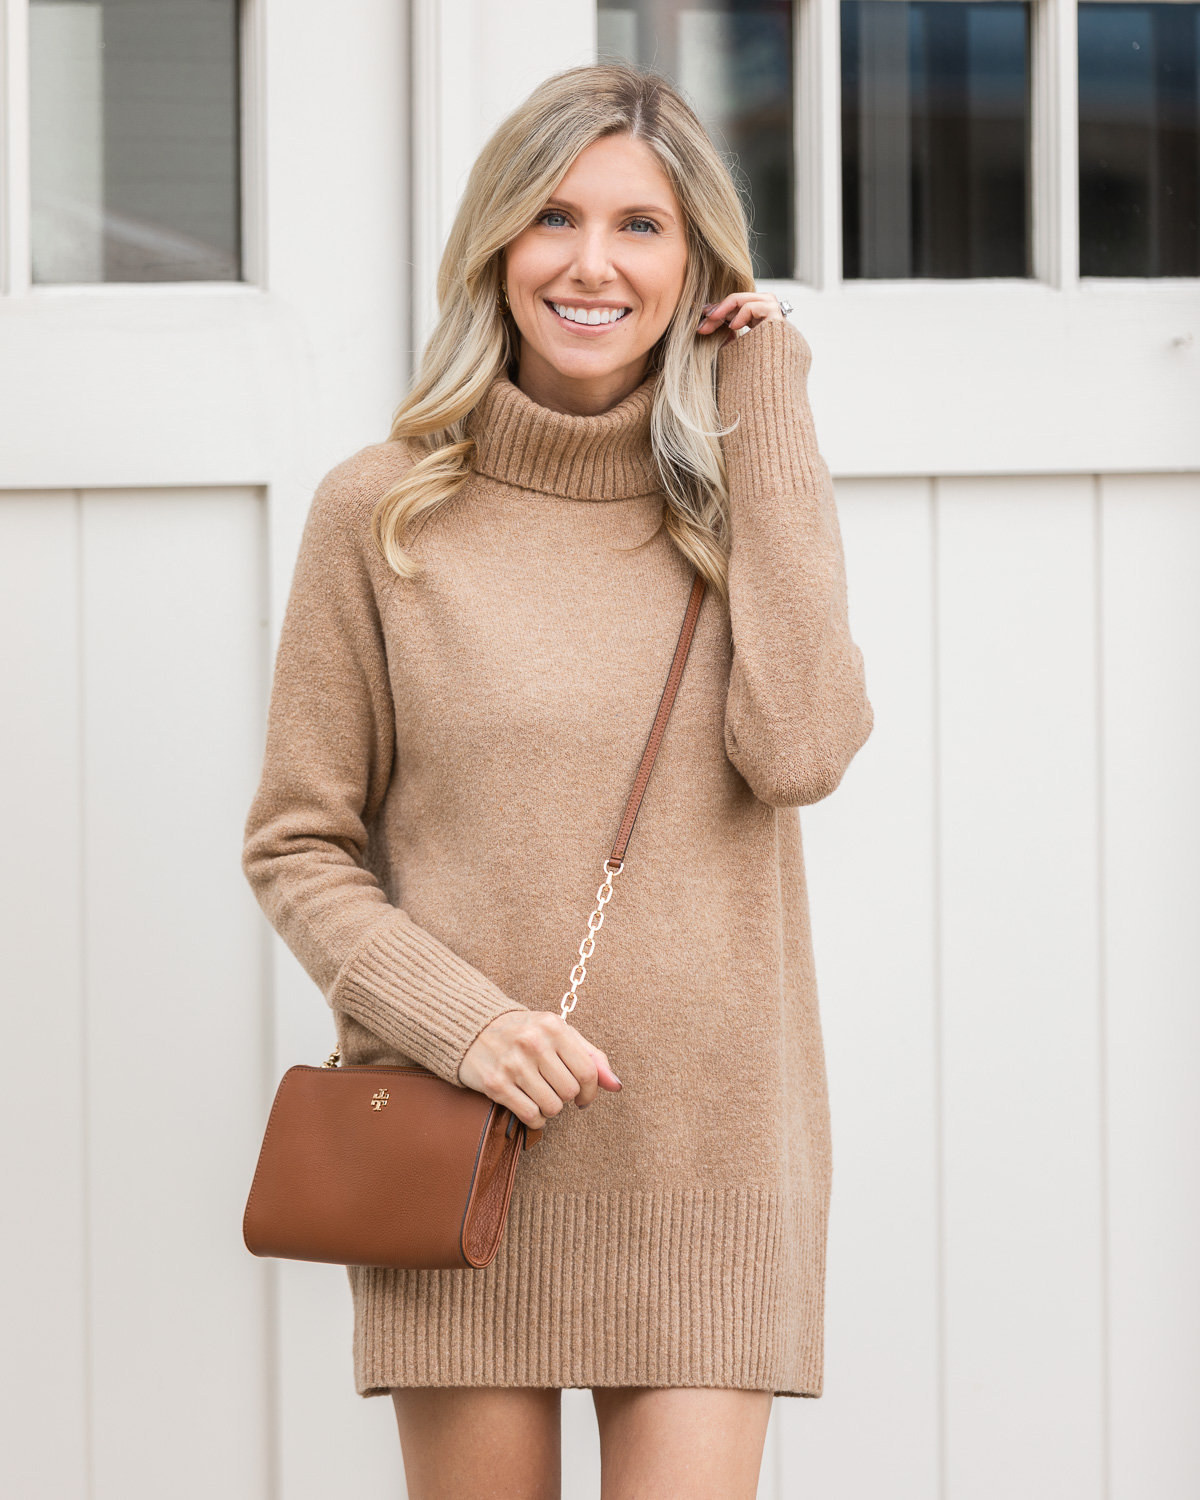 The best sweater dress for fall - Chic on the Cheap